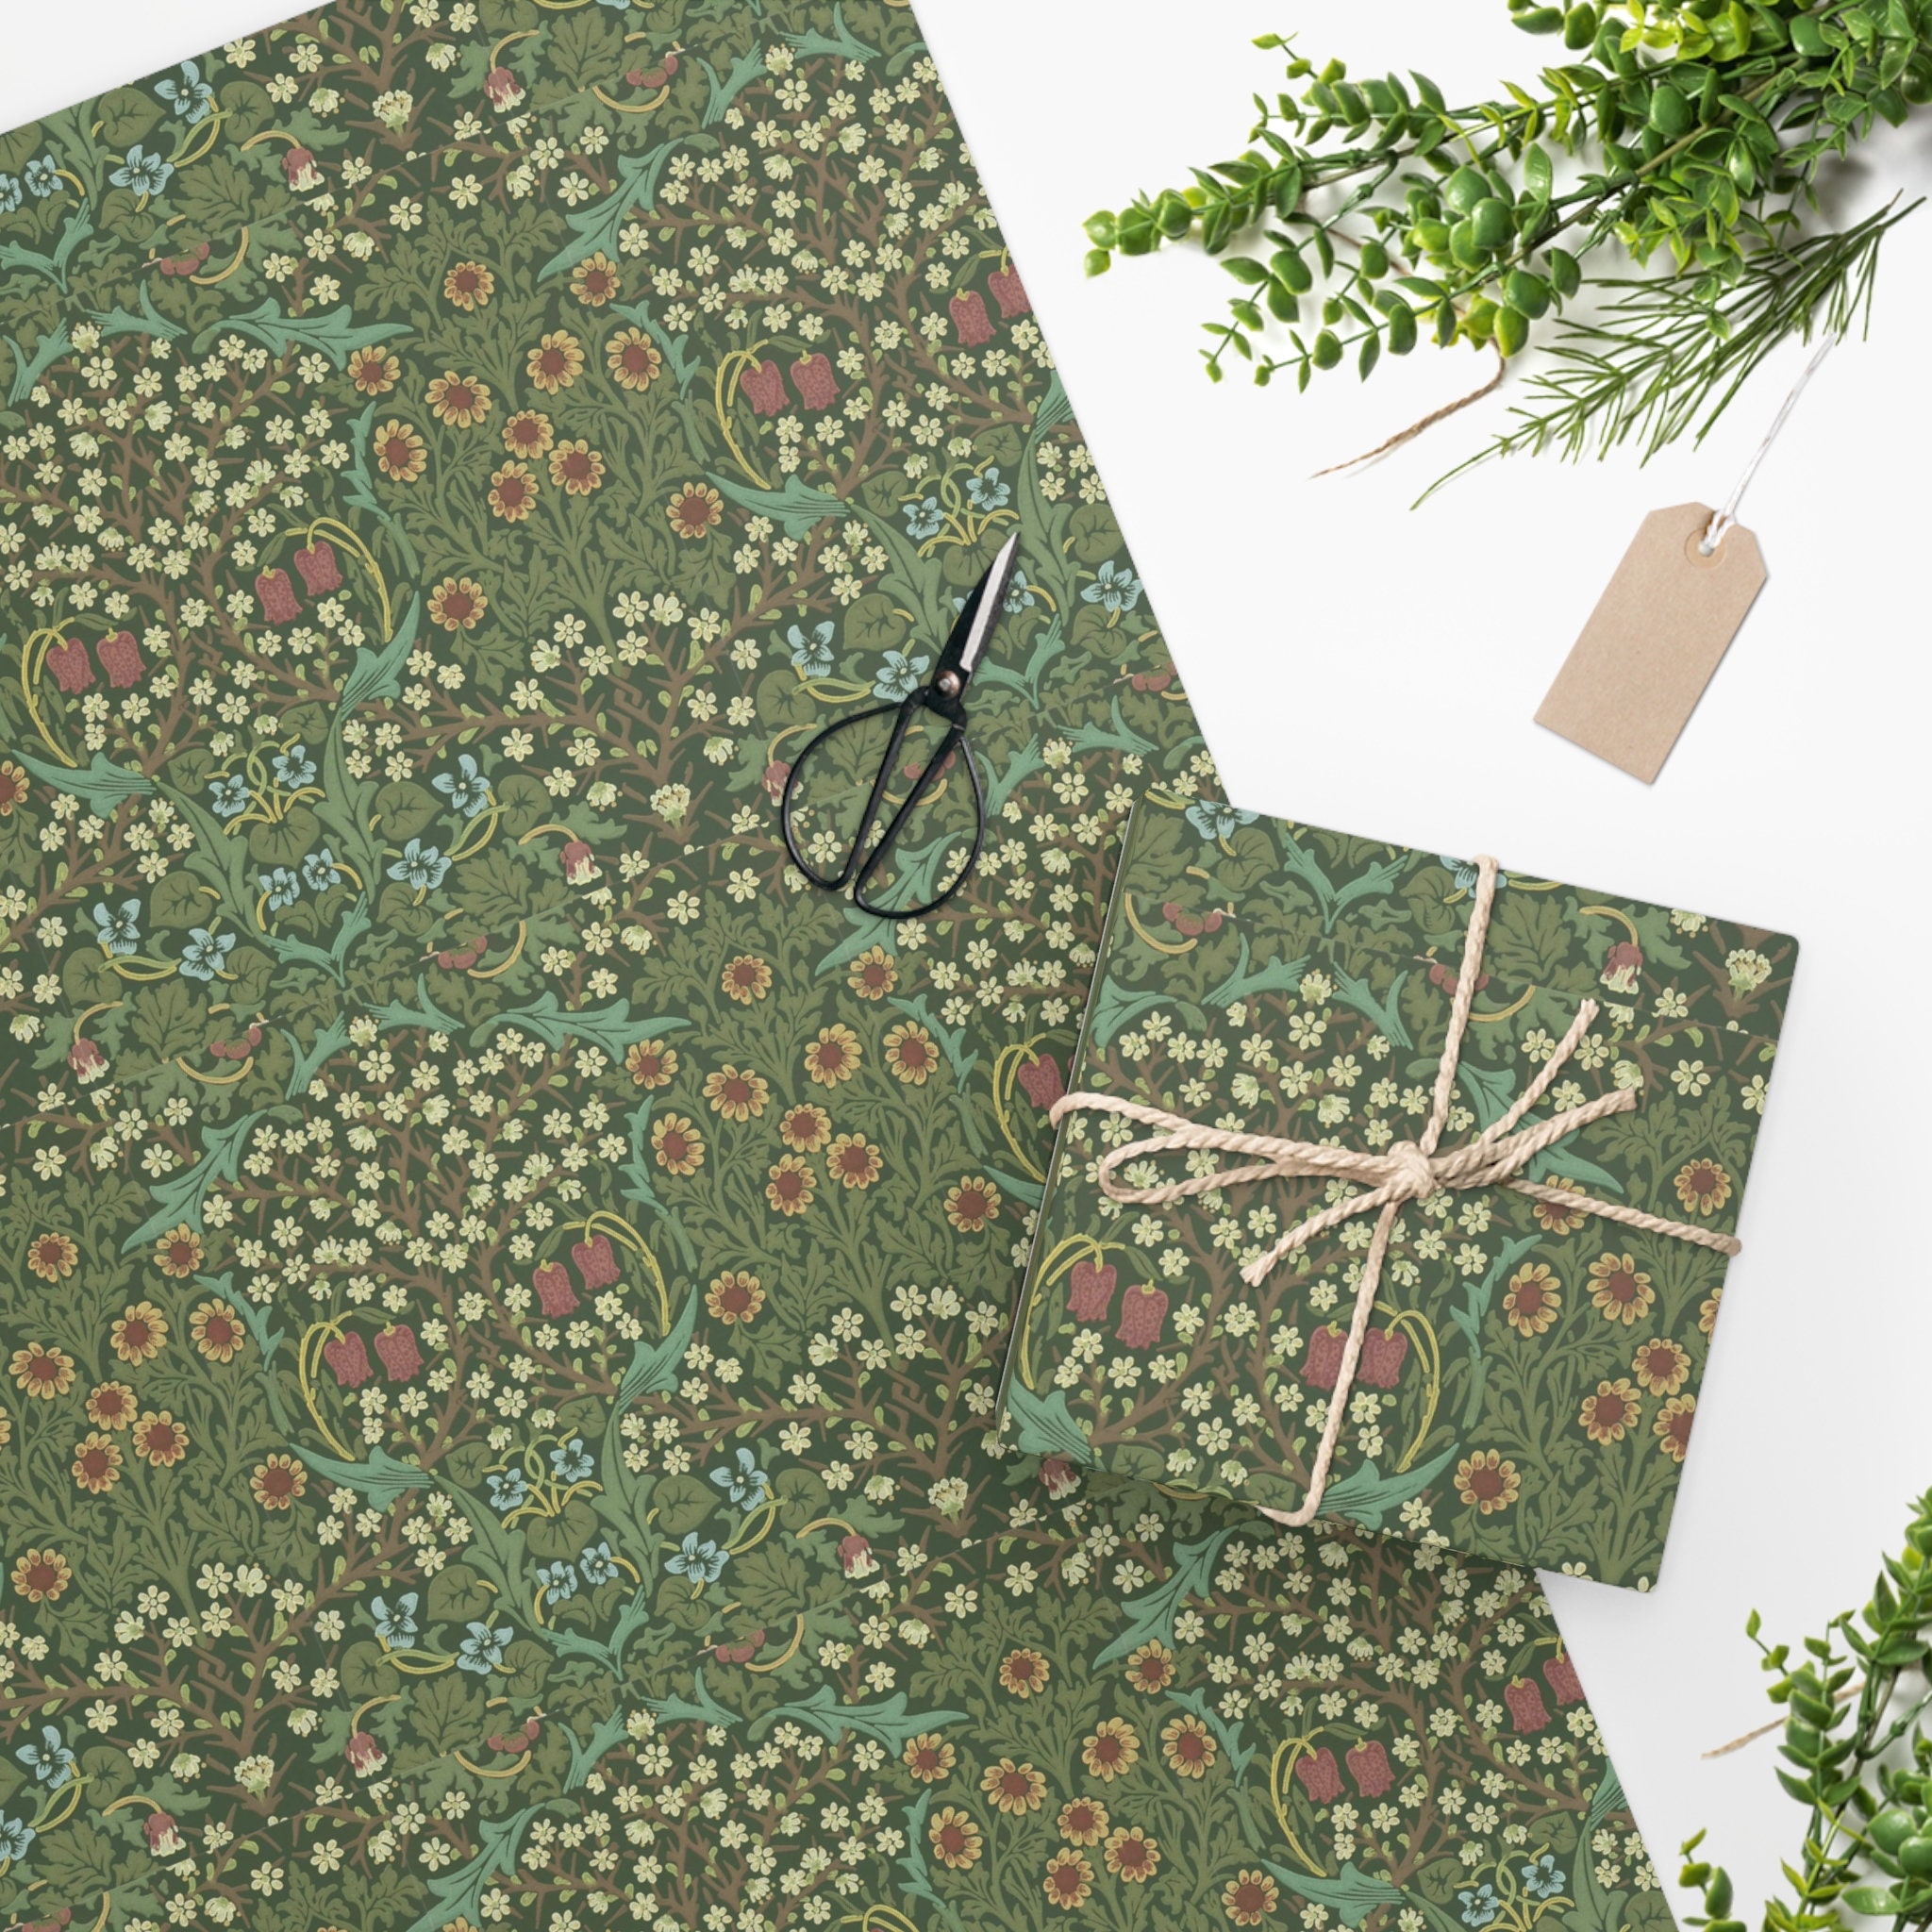 Falling Leaves Hand Drawn Pattern - Dark Green Wrapping Paper by